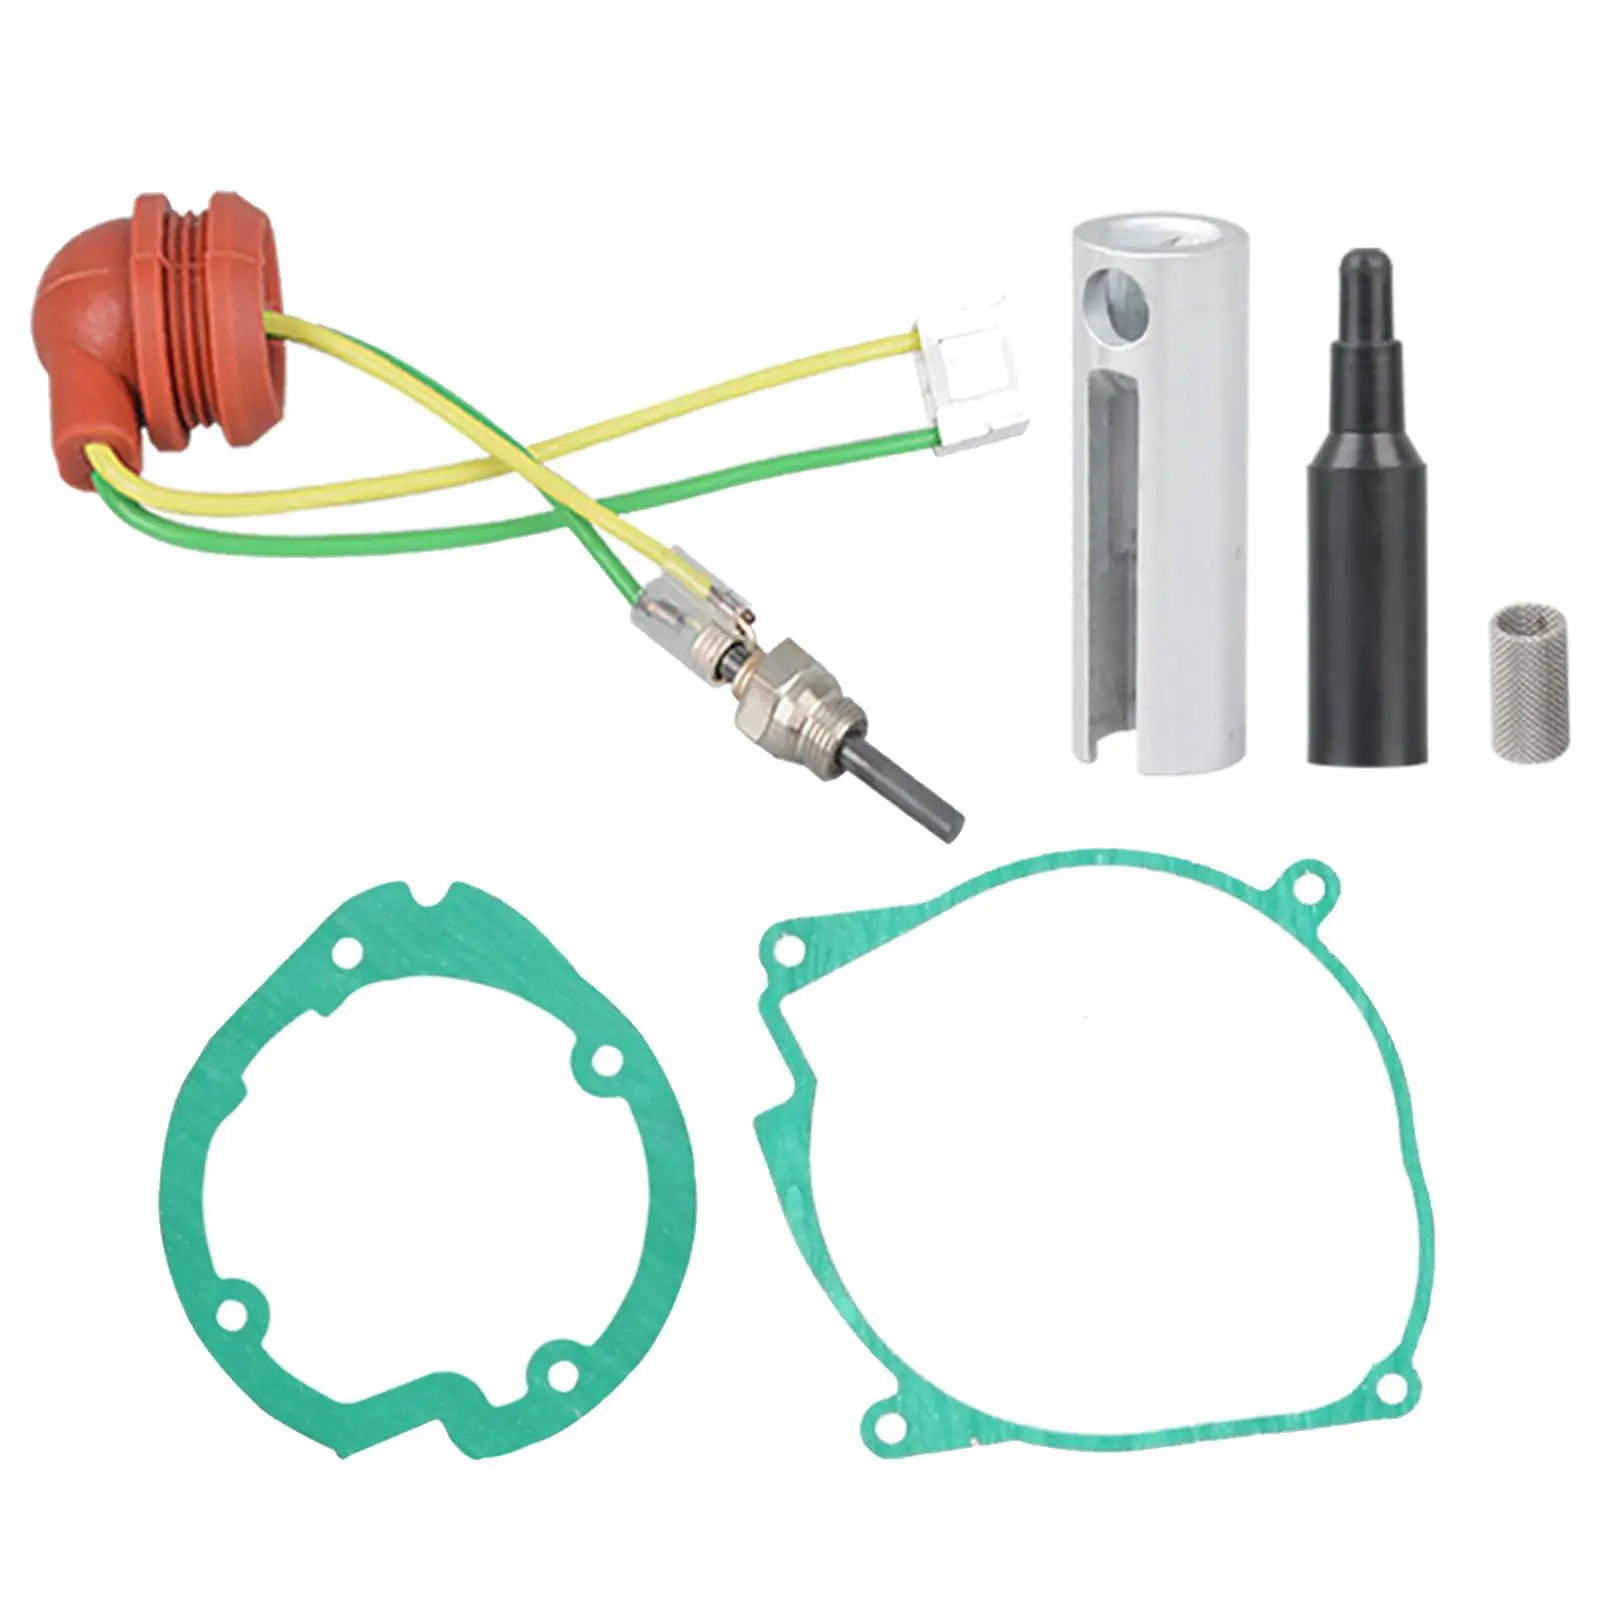 Glow Plug Repair Kit Supplies Gasket Replace Net for 12V 2kW Parking Heater